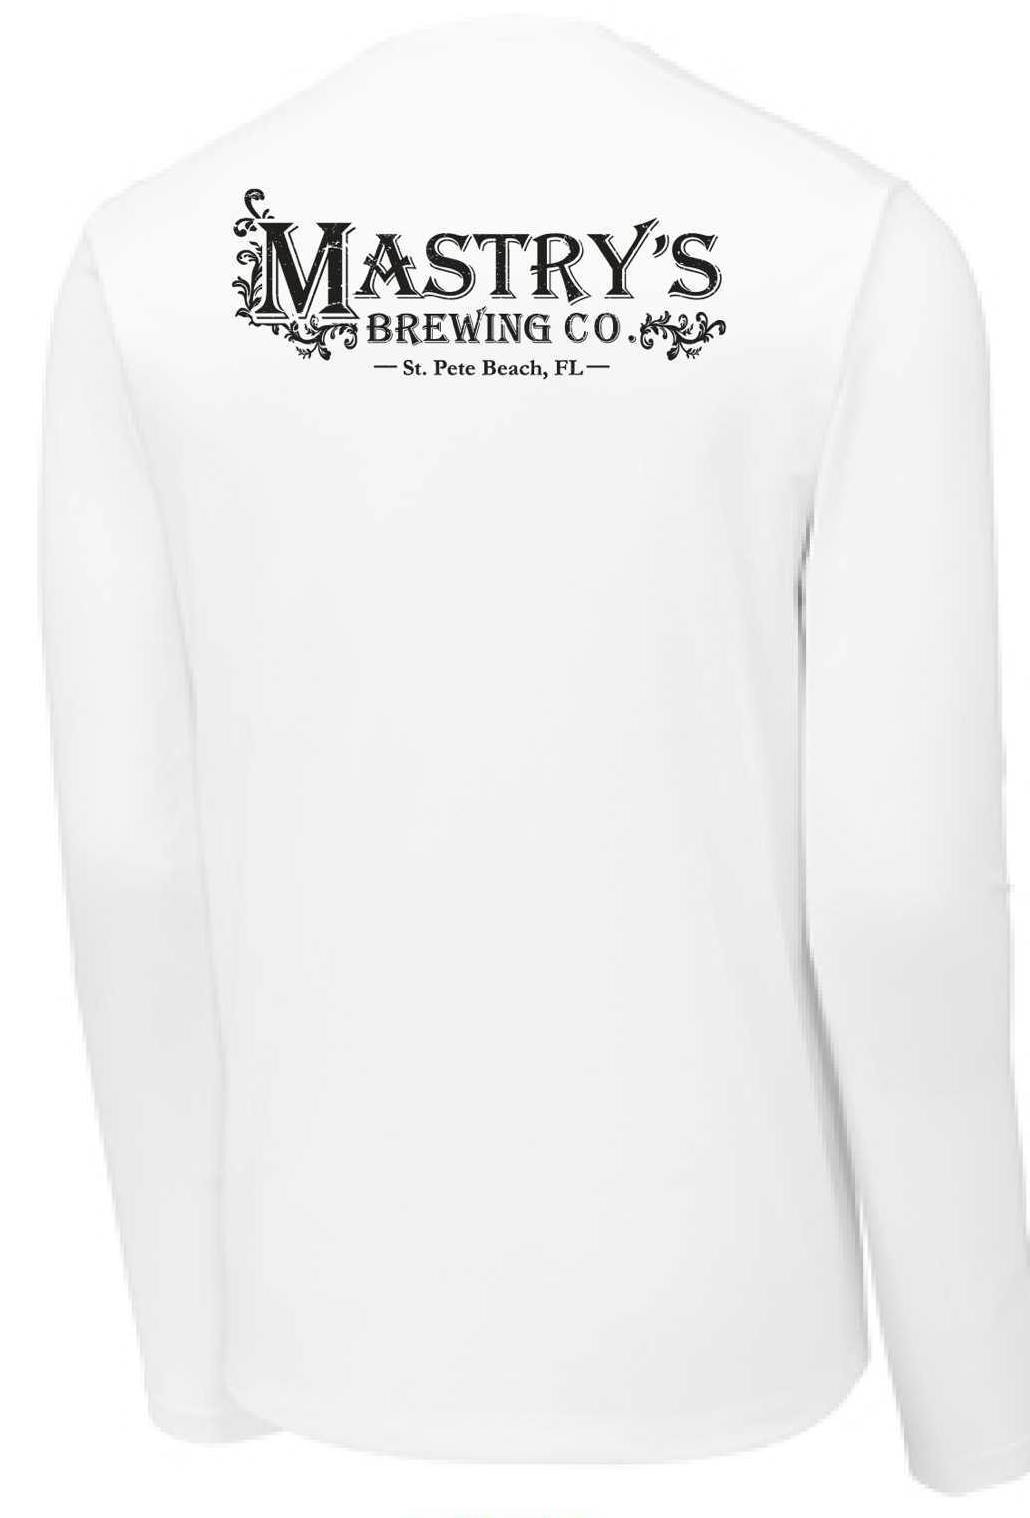 UPF Long Sleeve Shirts  Mastry's Brewing Co. Online Shop